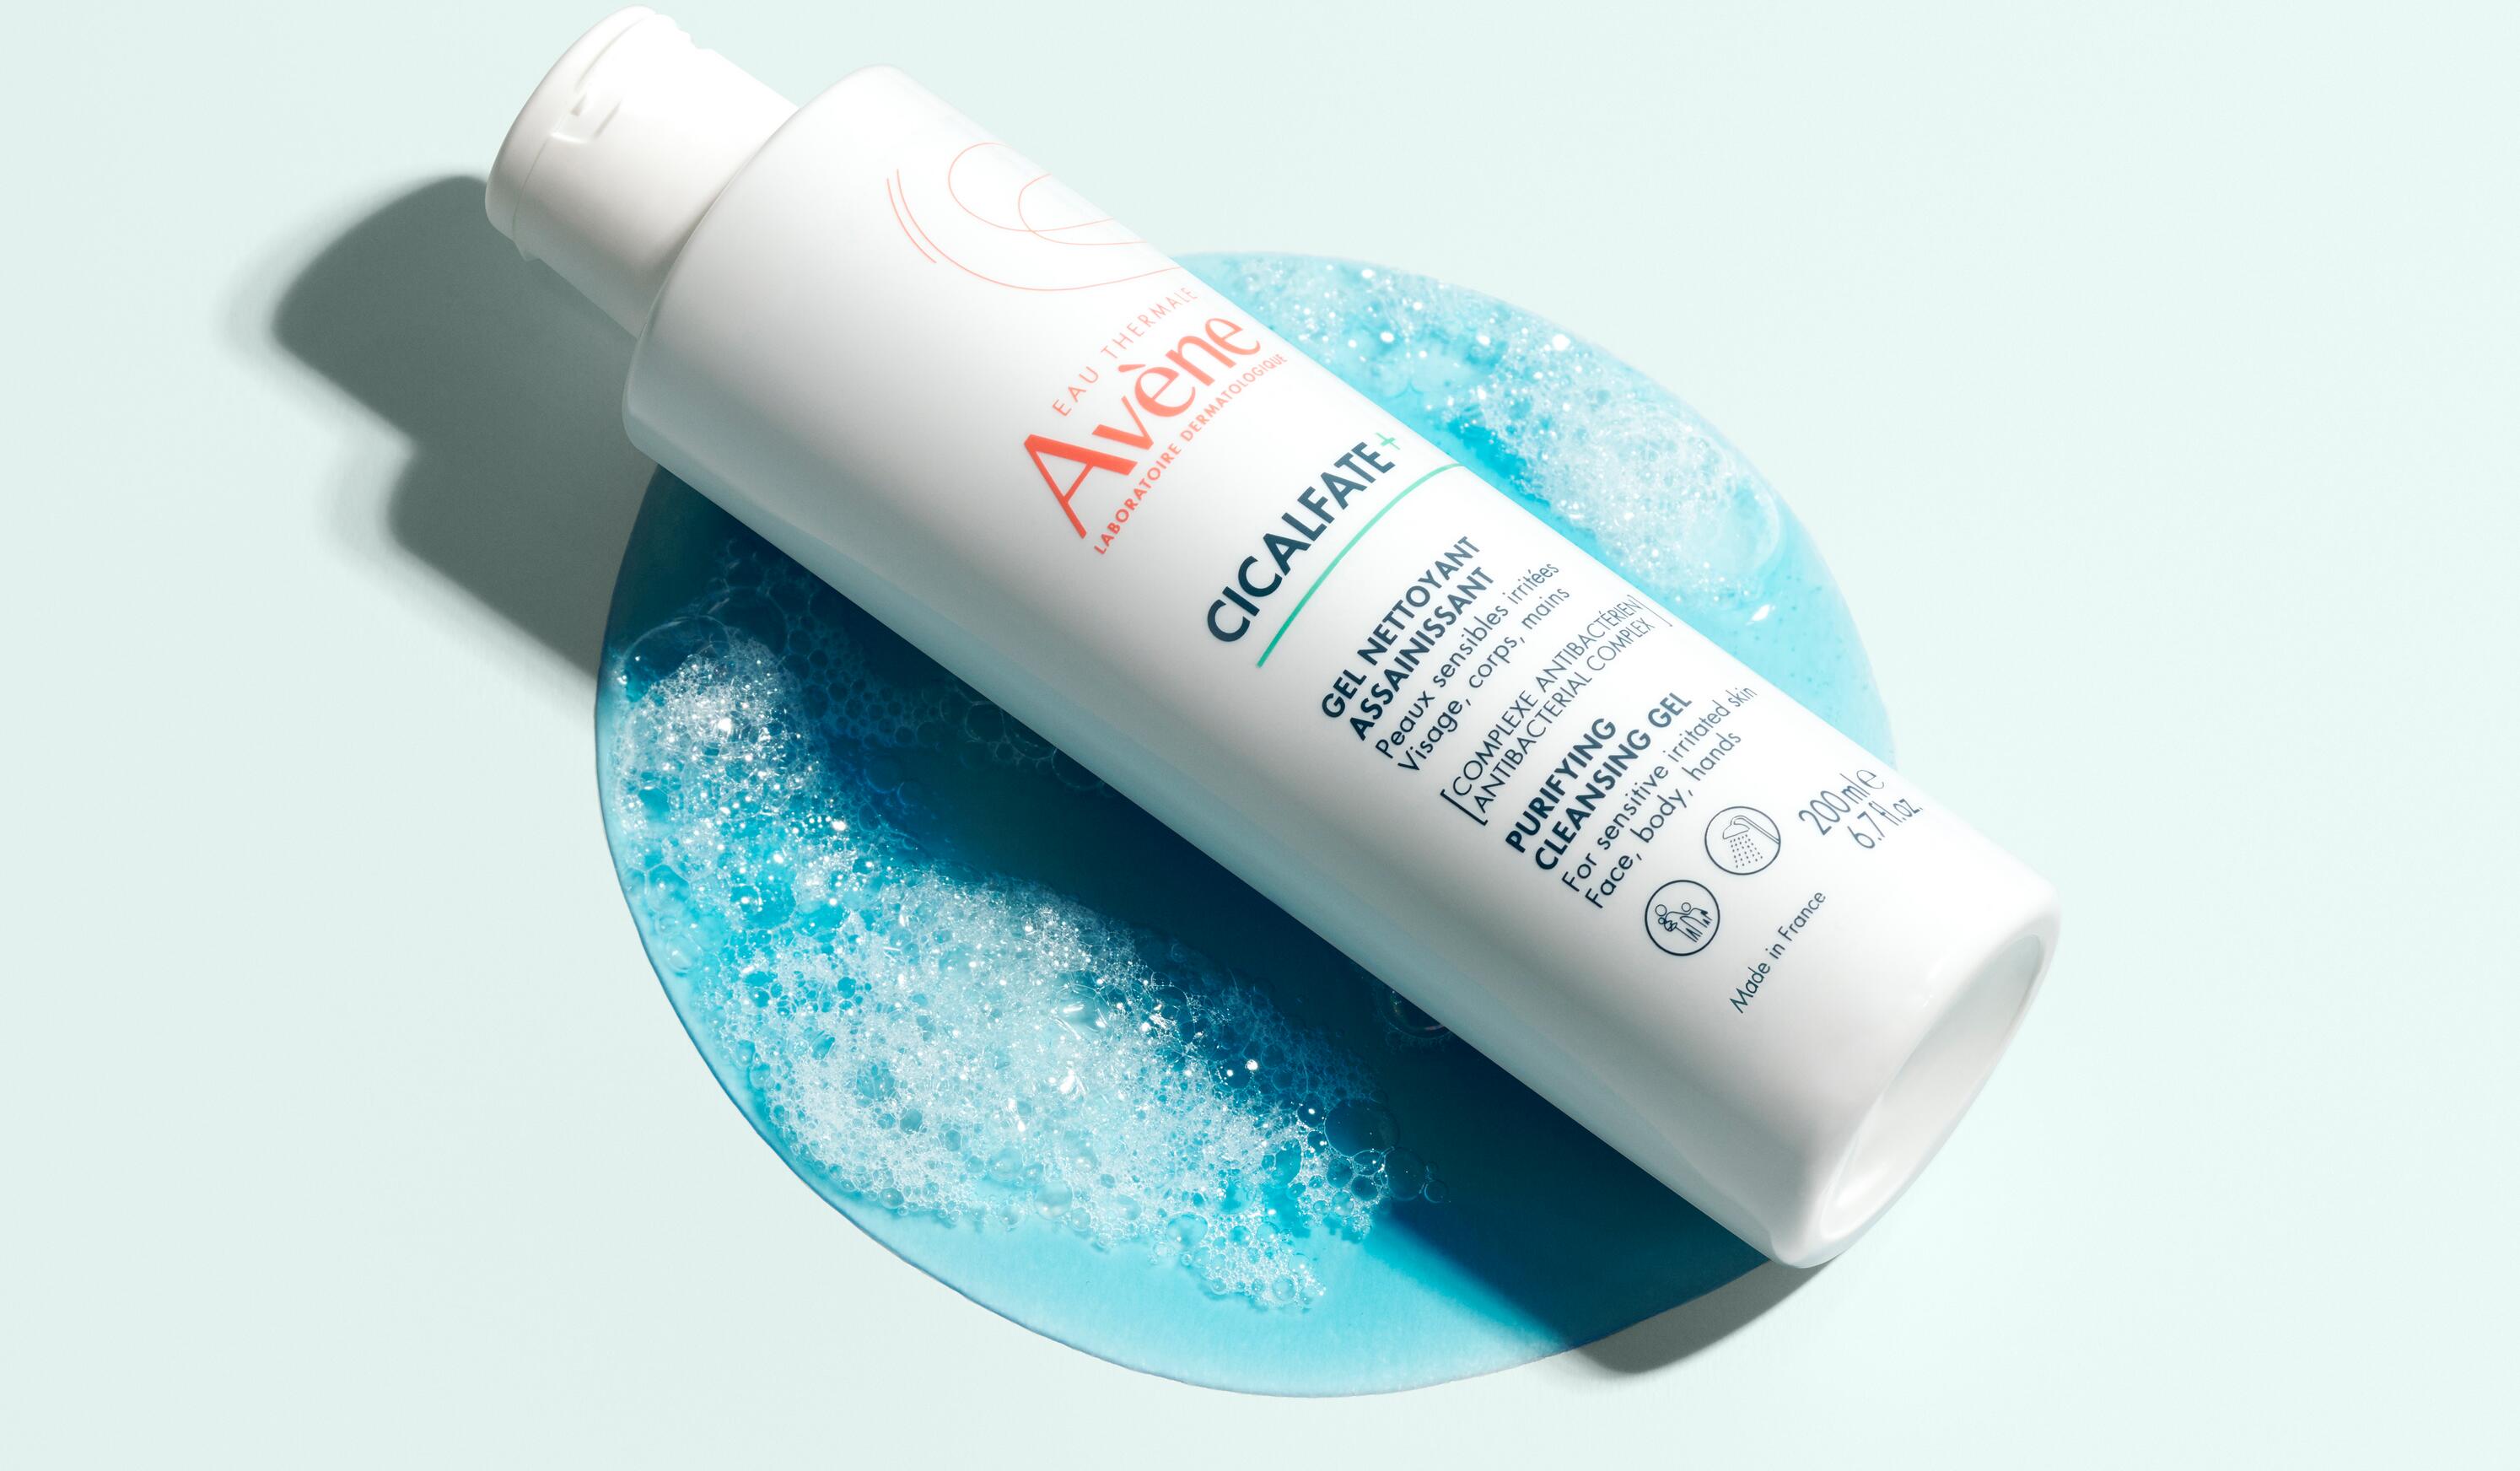 Cicalfate + Purifying Cleansing Gel- United States